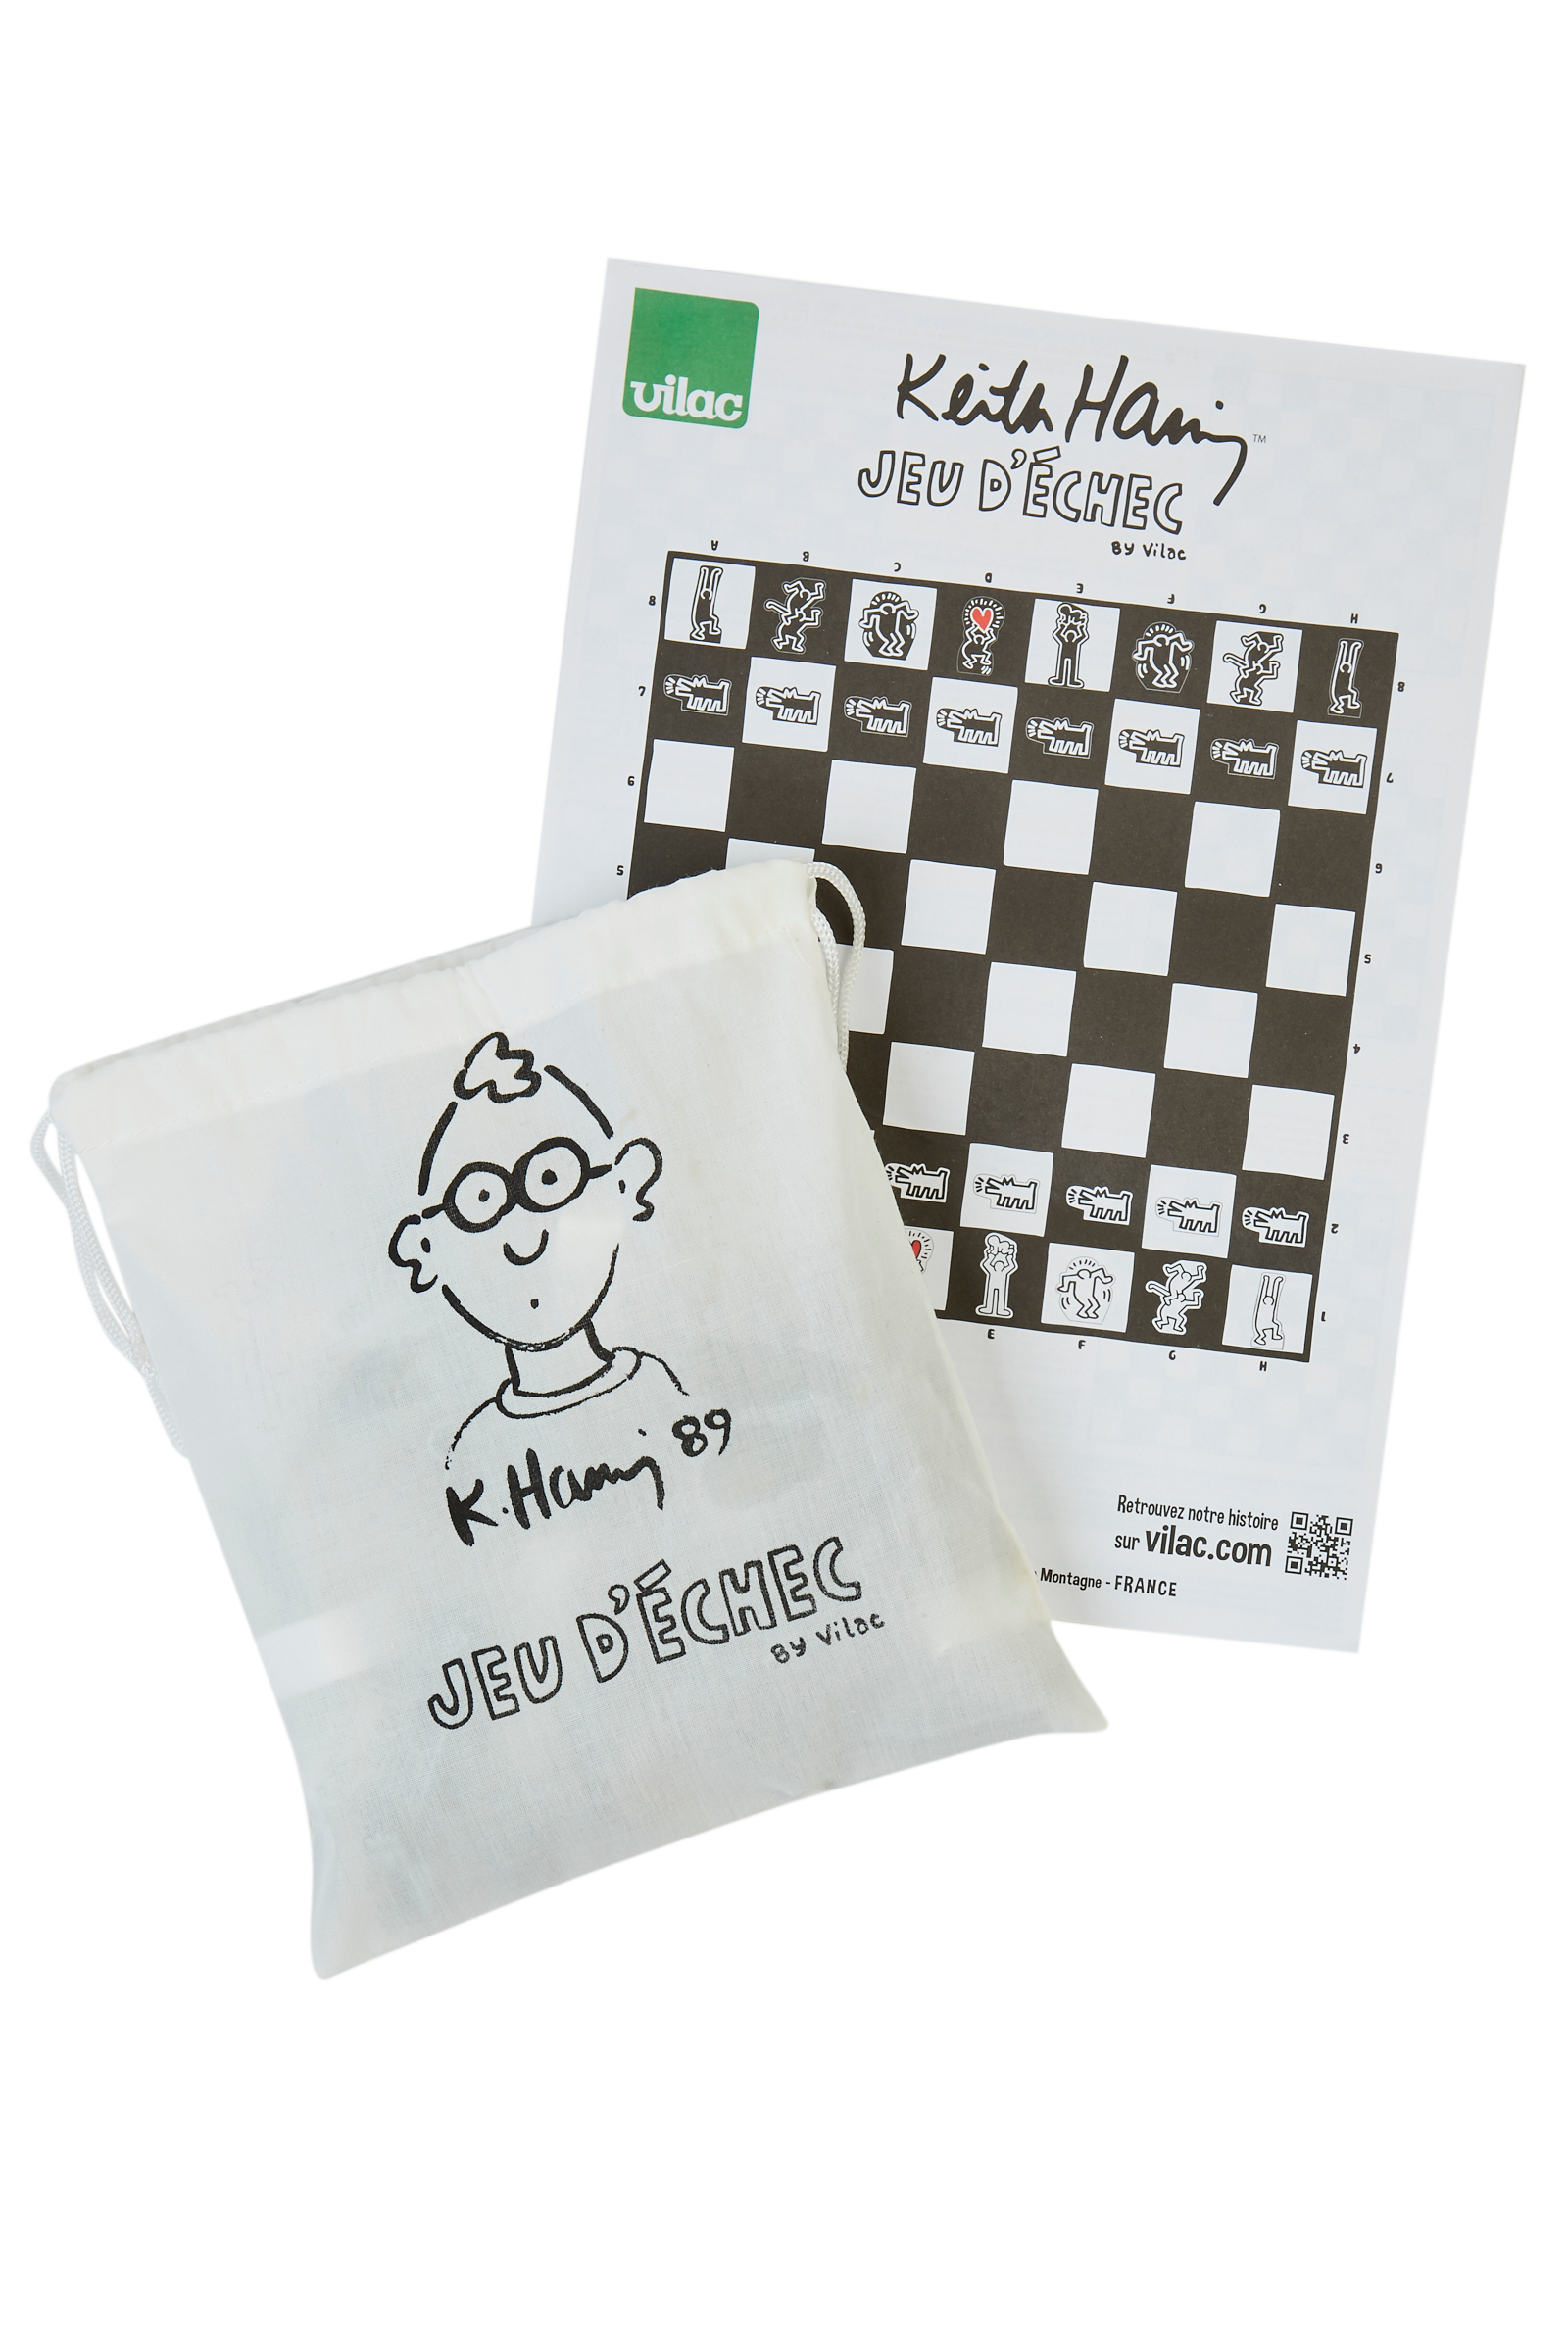 Keith Haring - Black and White Chess Set 